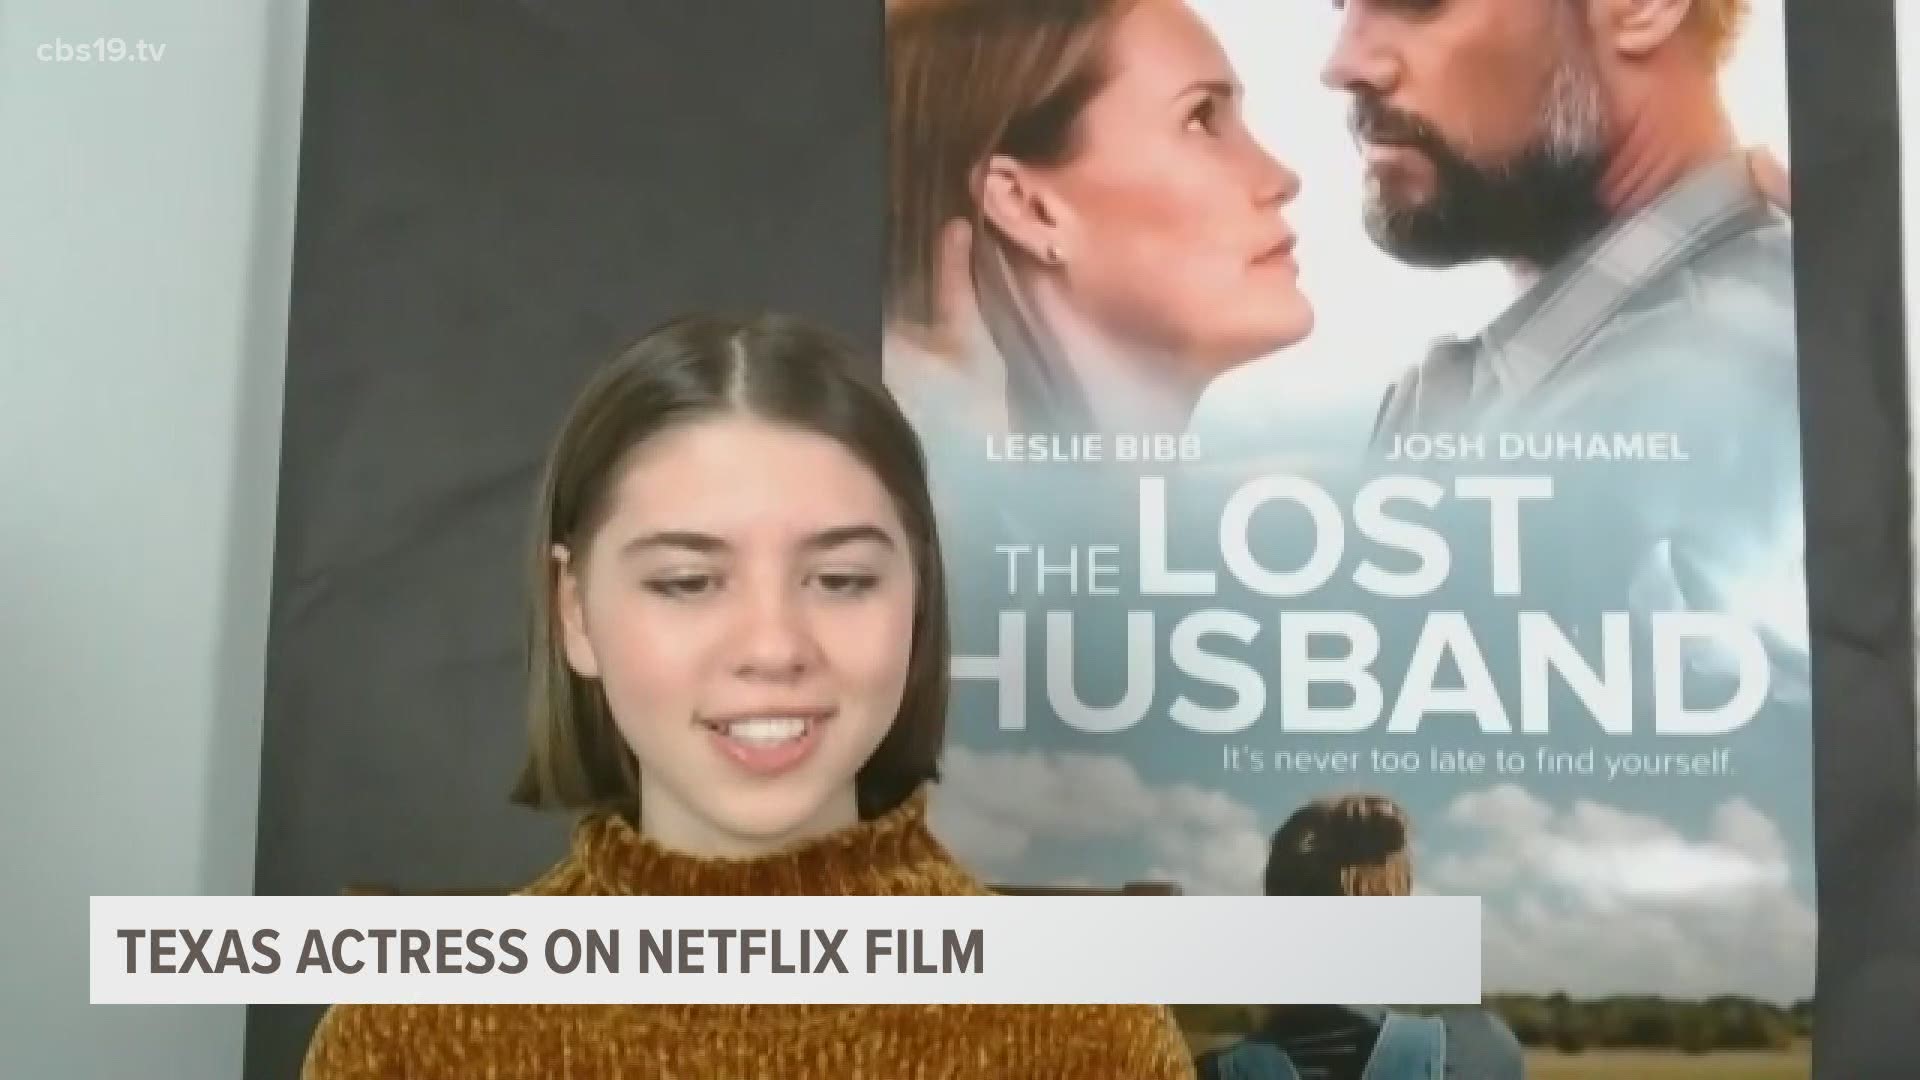 Rising star, Callie Haverda, plays Abby in the new Netflix film "The Lost Husband."